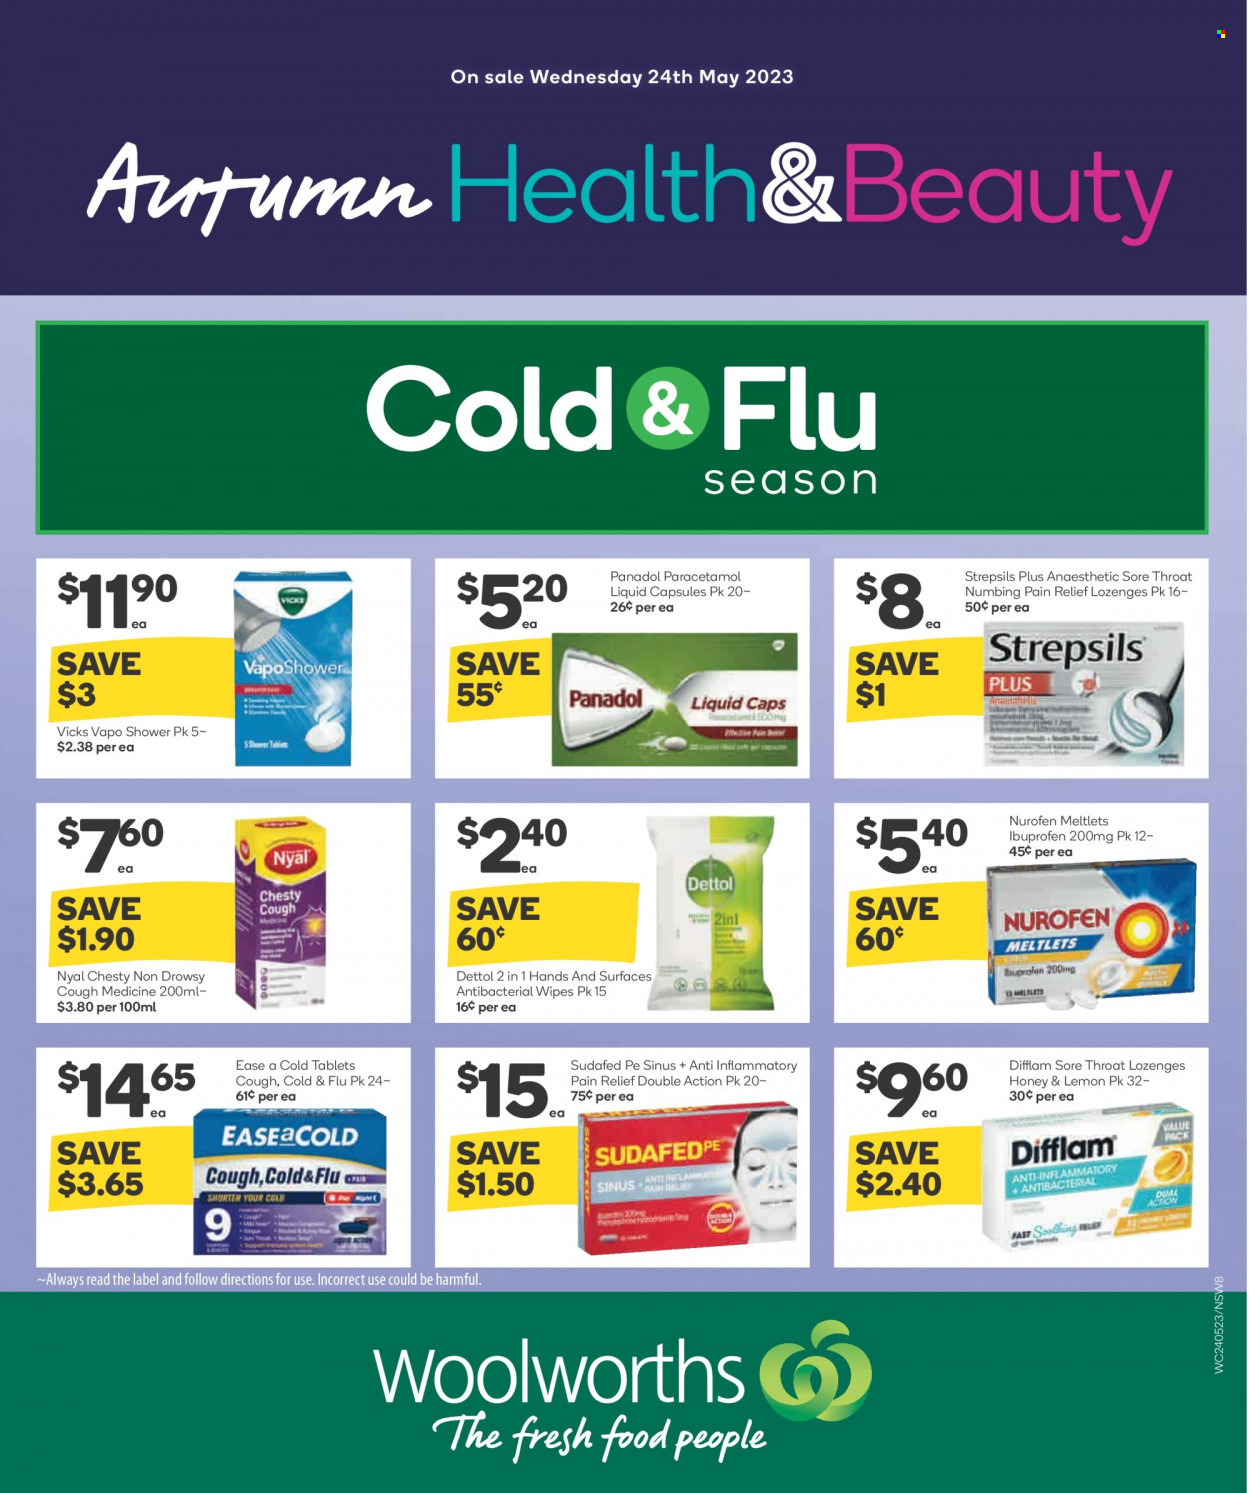 thumbnail - Woolworths Catalogue - 24 May 2023 - 30 May 2023 - Sales products - honey, wipes, Dettol, Vicks, pain relief, Cold & Flu, Sudafed, Ibuprofen, Strepsils, Nurofen, Panadol, medicine. Page 2.